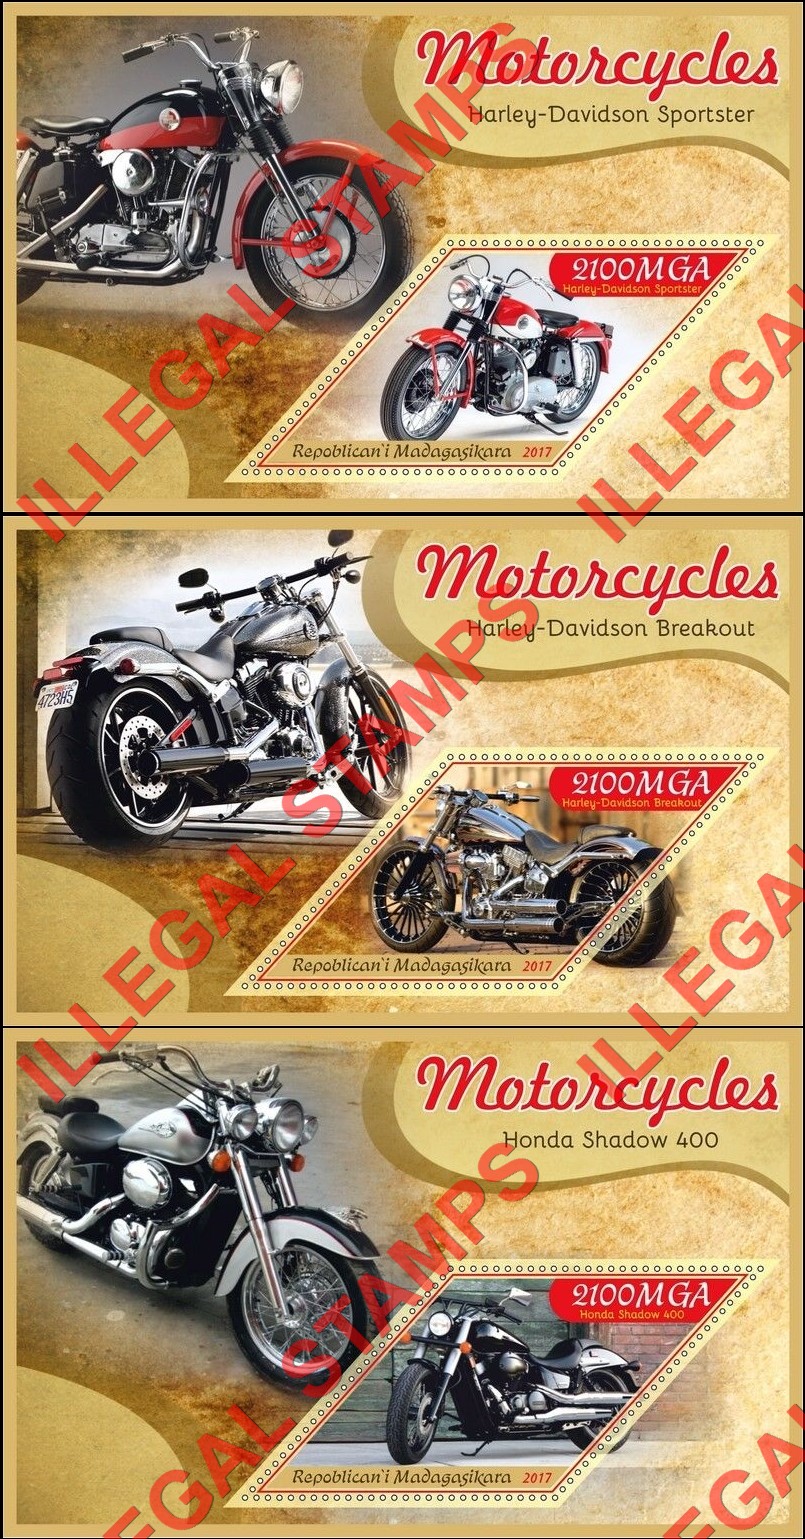 Madagascar 2017 Motorcycles Illegal Stamp Souvenir Sheets of 1 (Part 1)